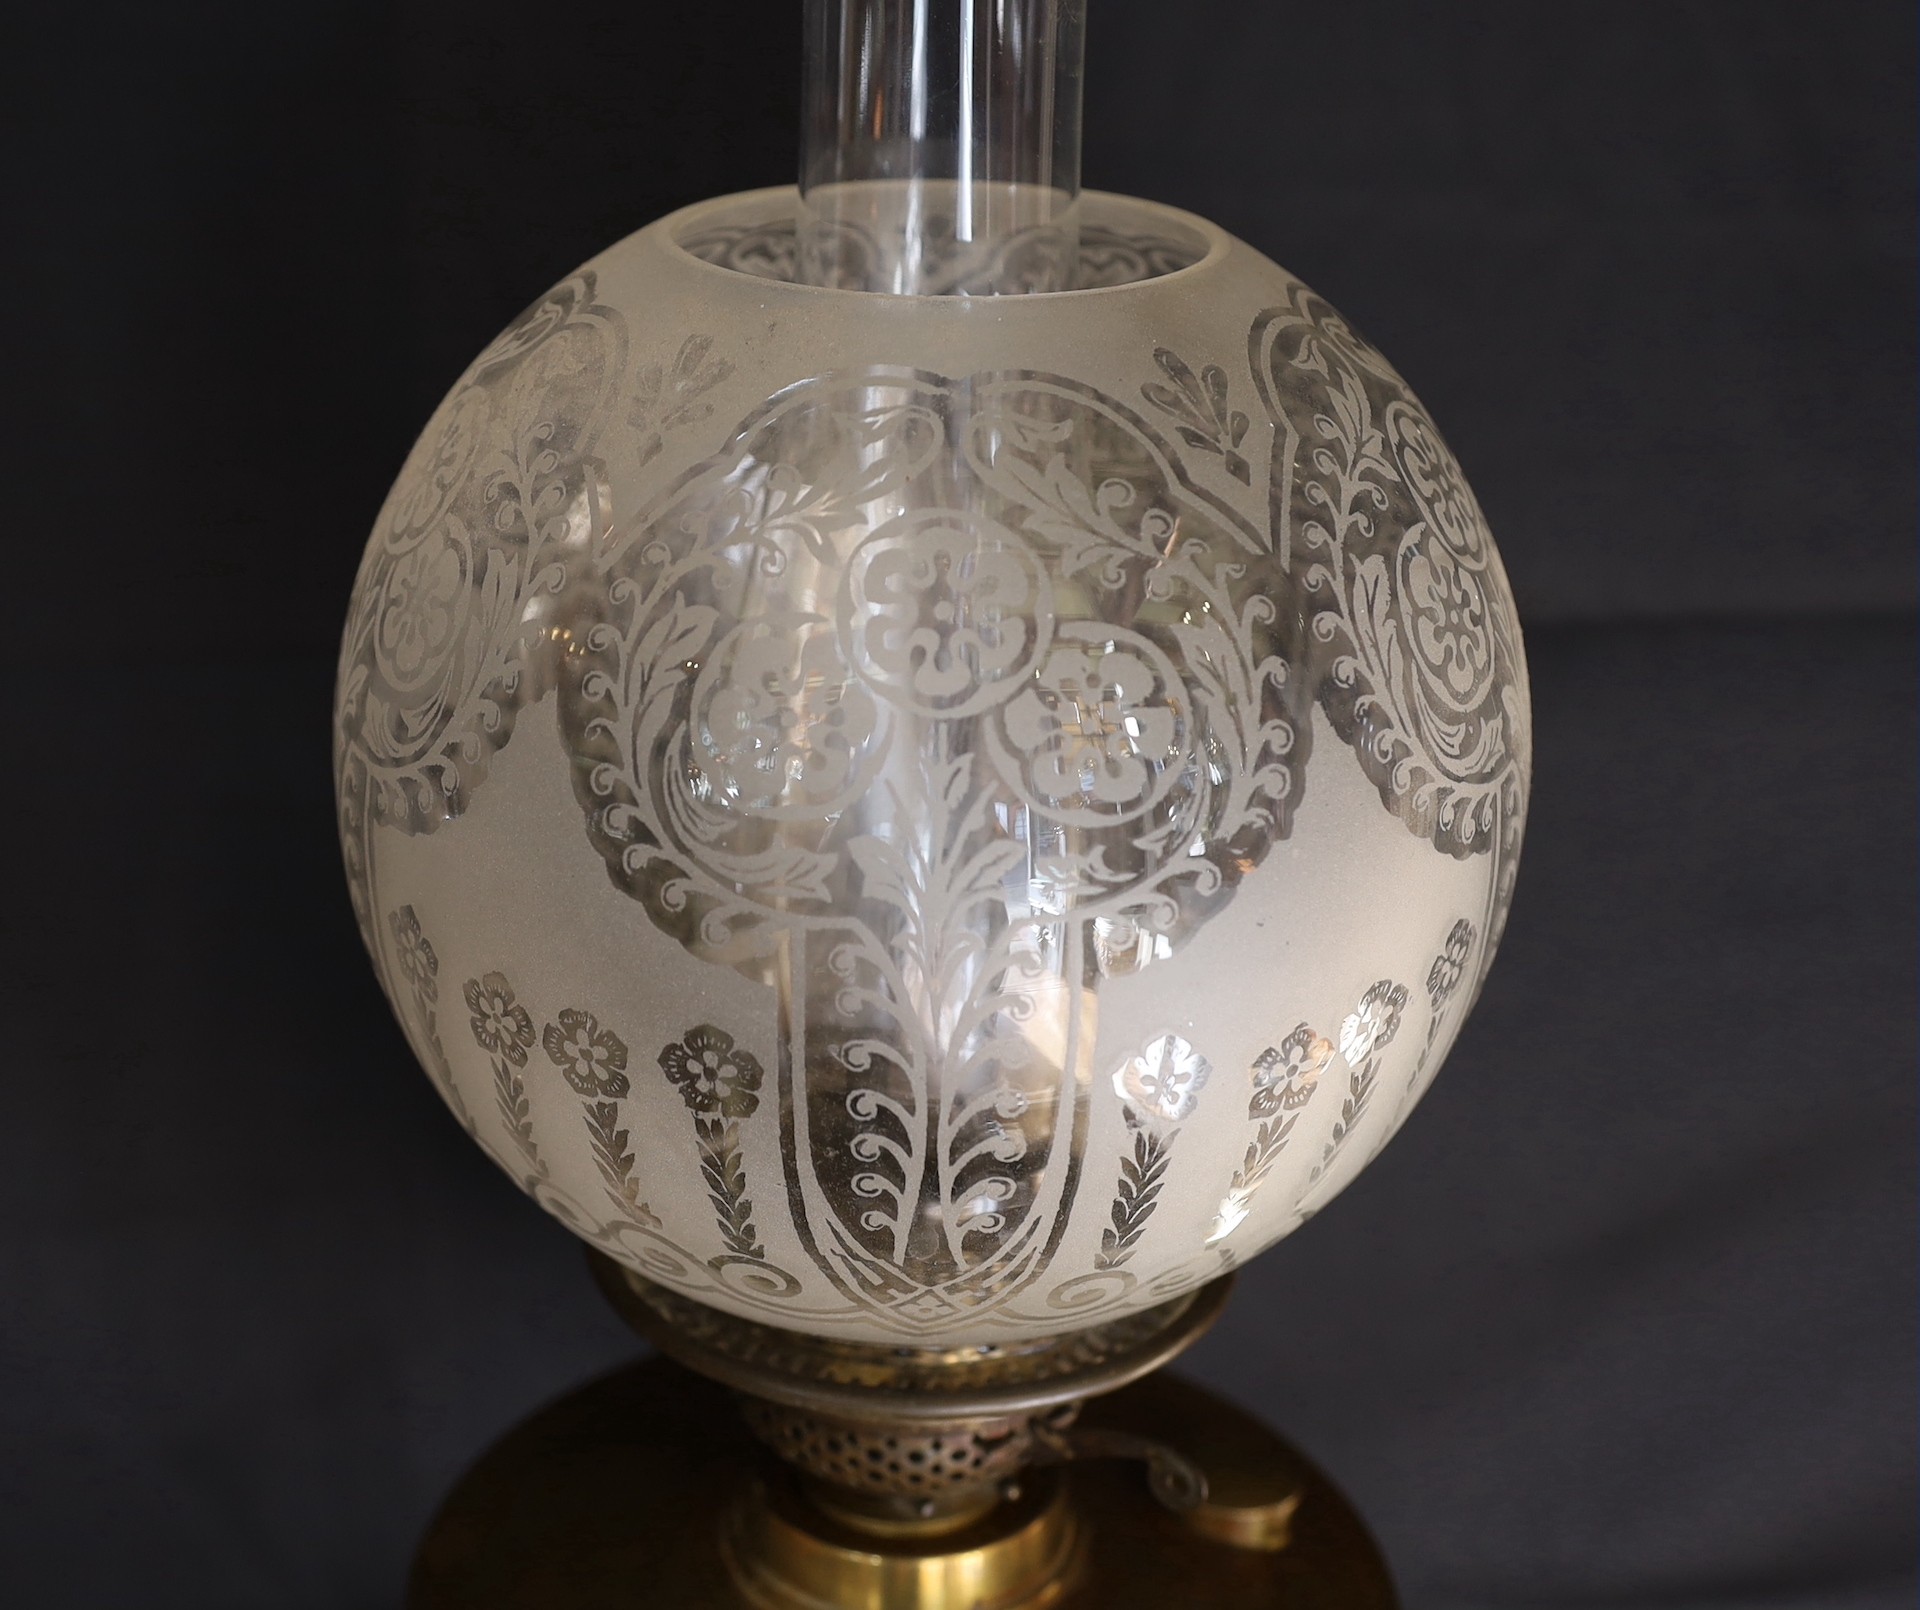 An Edwardian brass oil lamp, with etched glass globe, duplex mechanism and Art Nouveau embossed base, height to top of shade 58cm